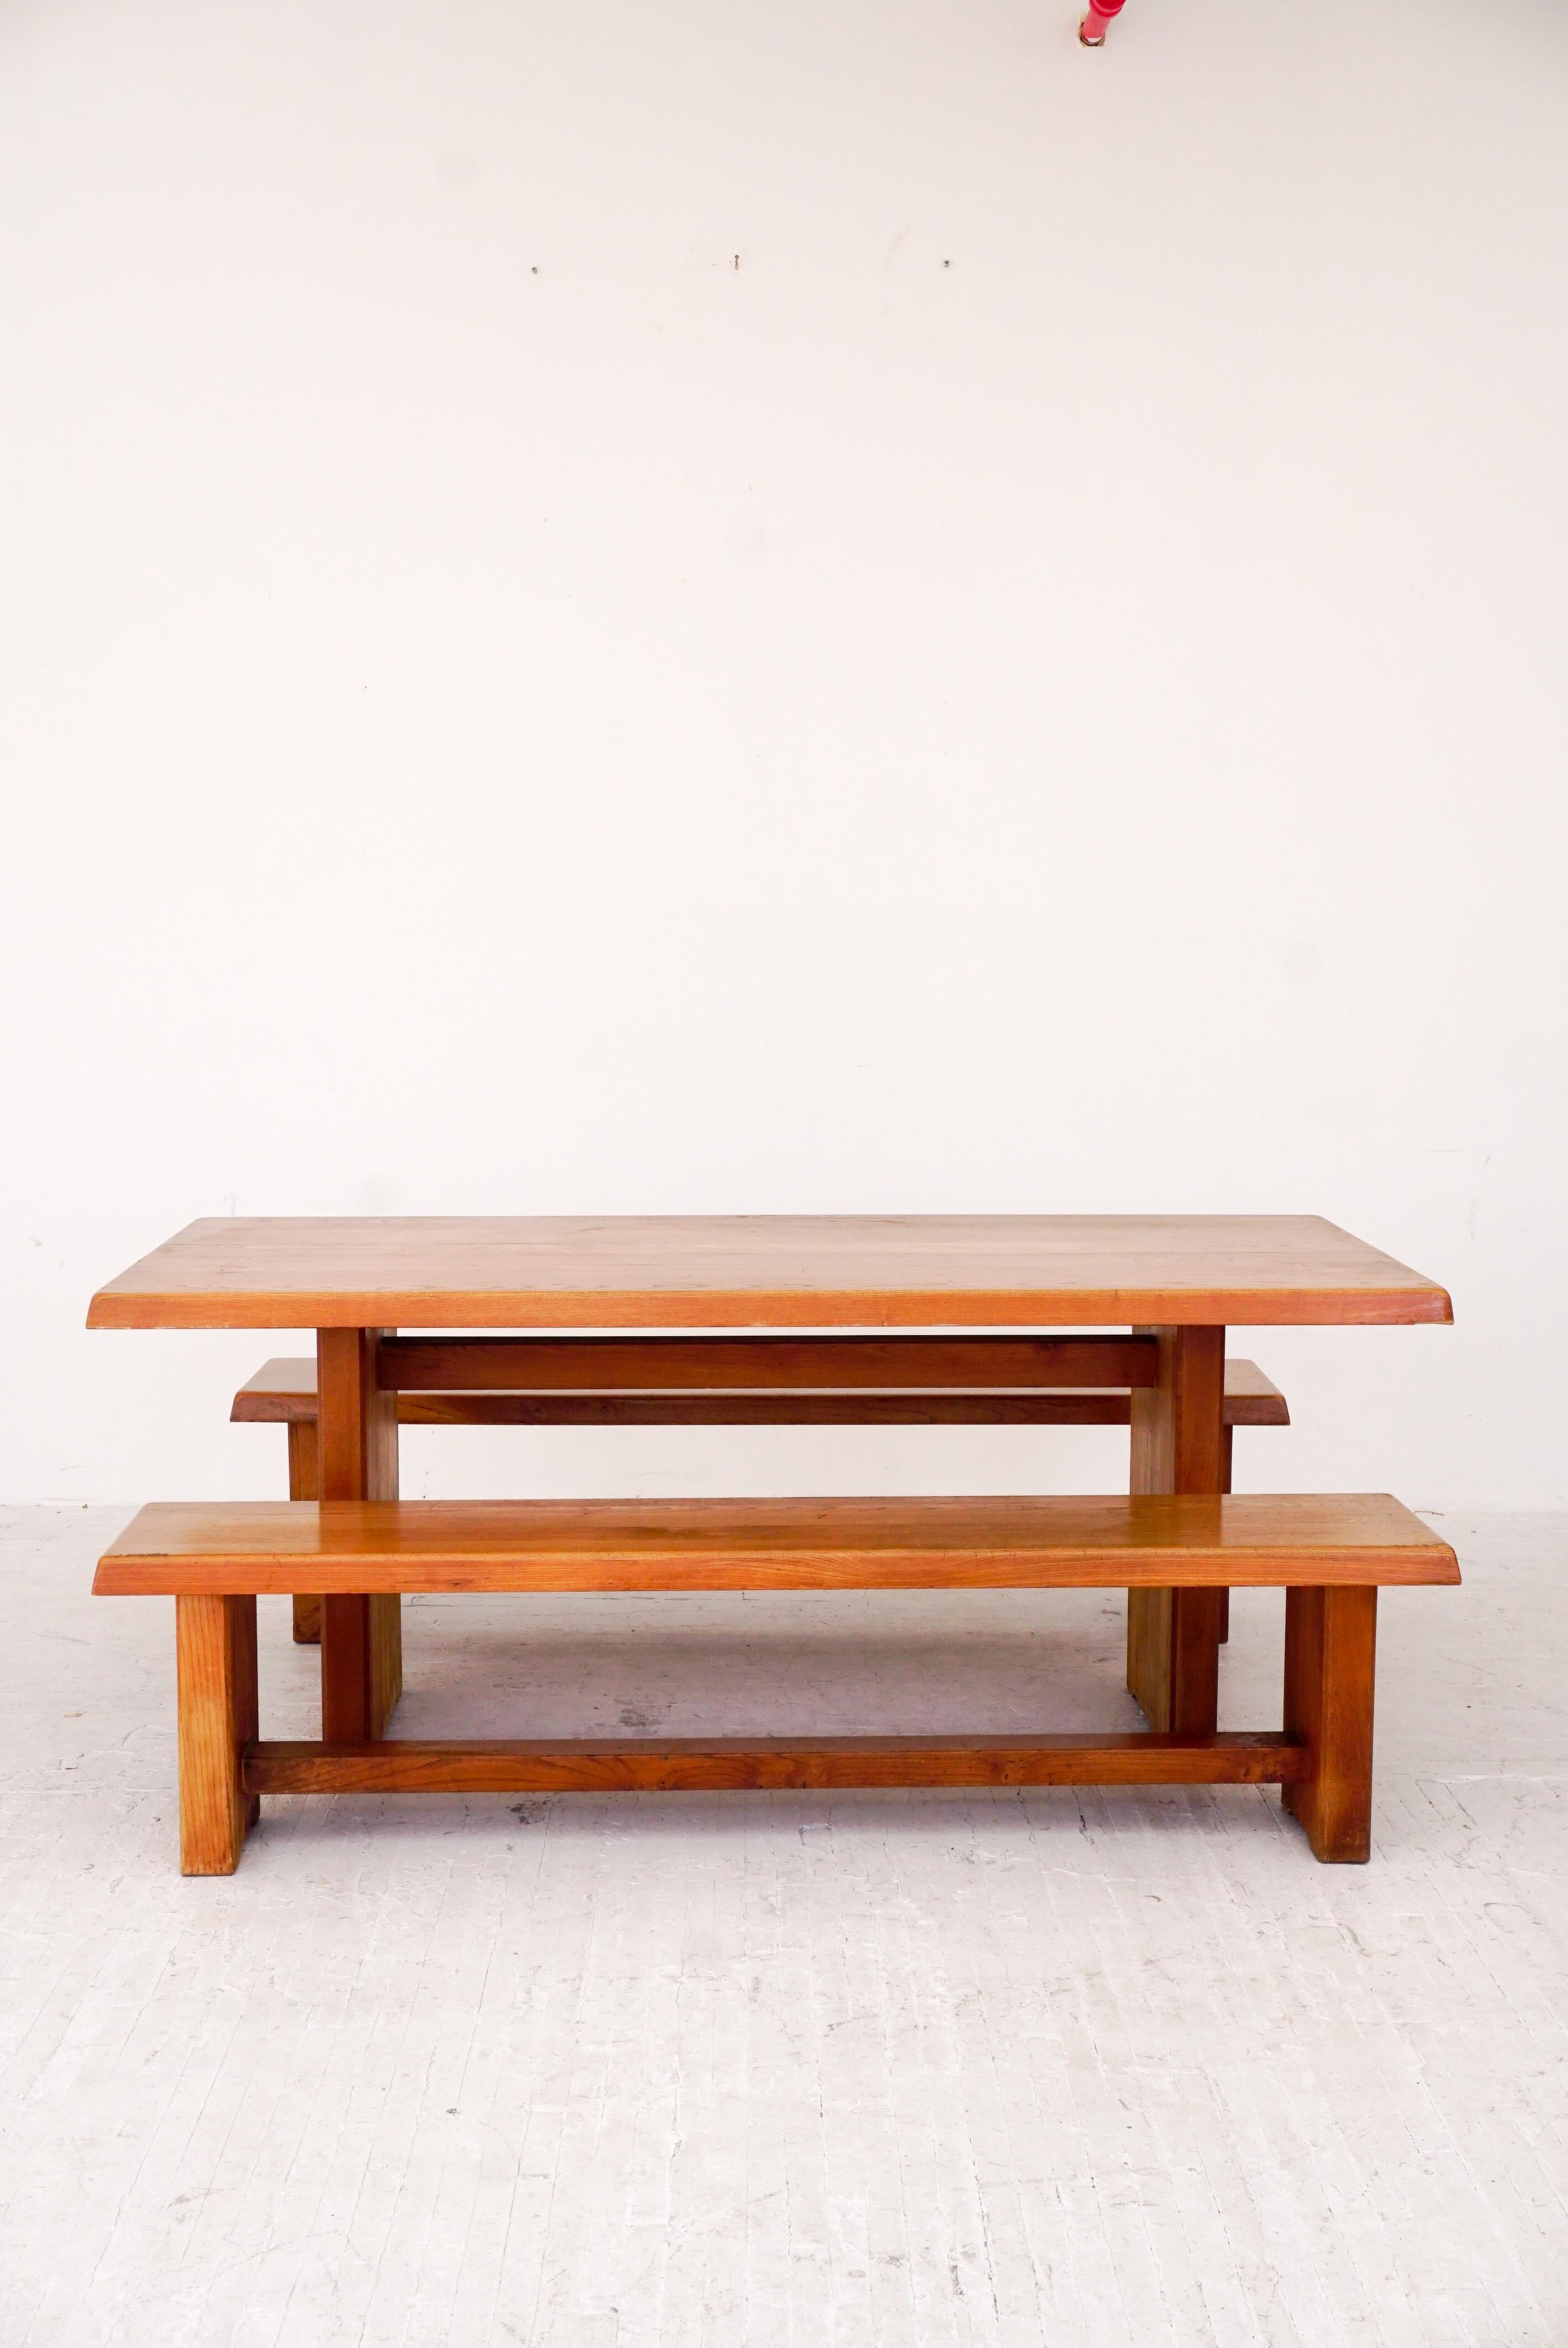 Extremely sturdy example of a vintage elmwood table and benches by Pierre Chapo designed 1960. 

Handmade joinery on table and bench ends and metal connectors with patina. 

Would be willing to separate benches and table.

Table only: